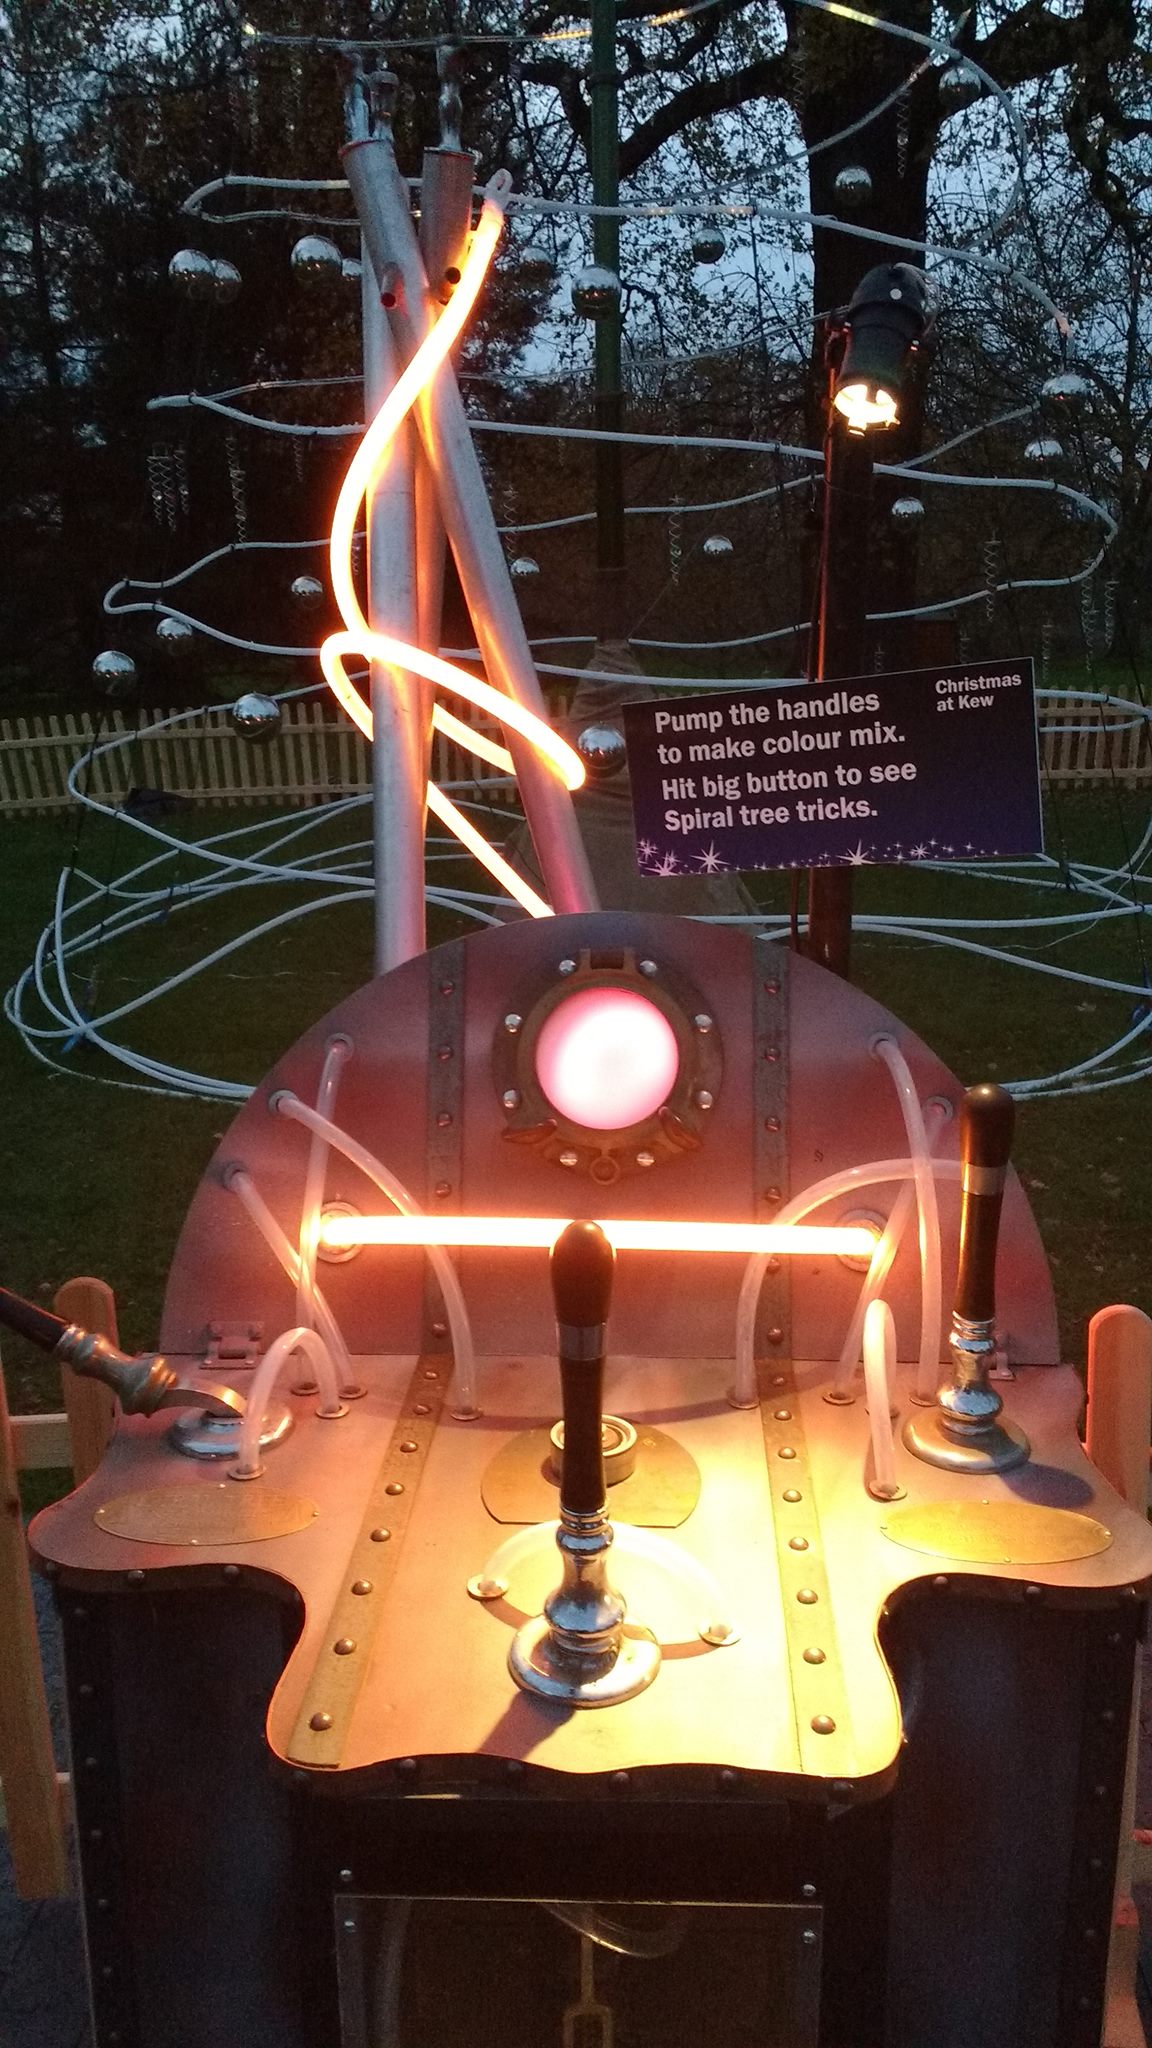 Control Panel for The Spiral of Lights